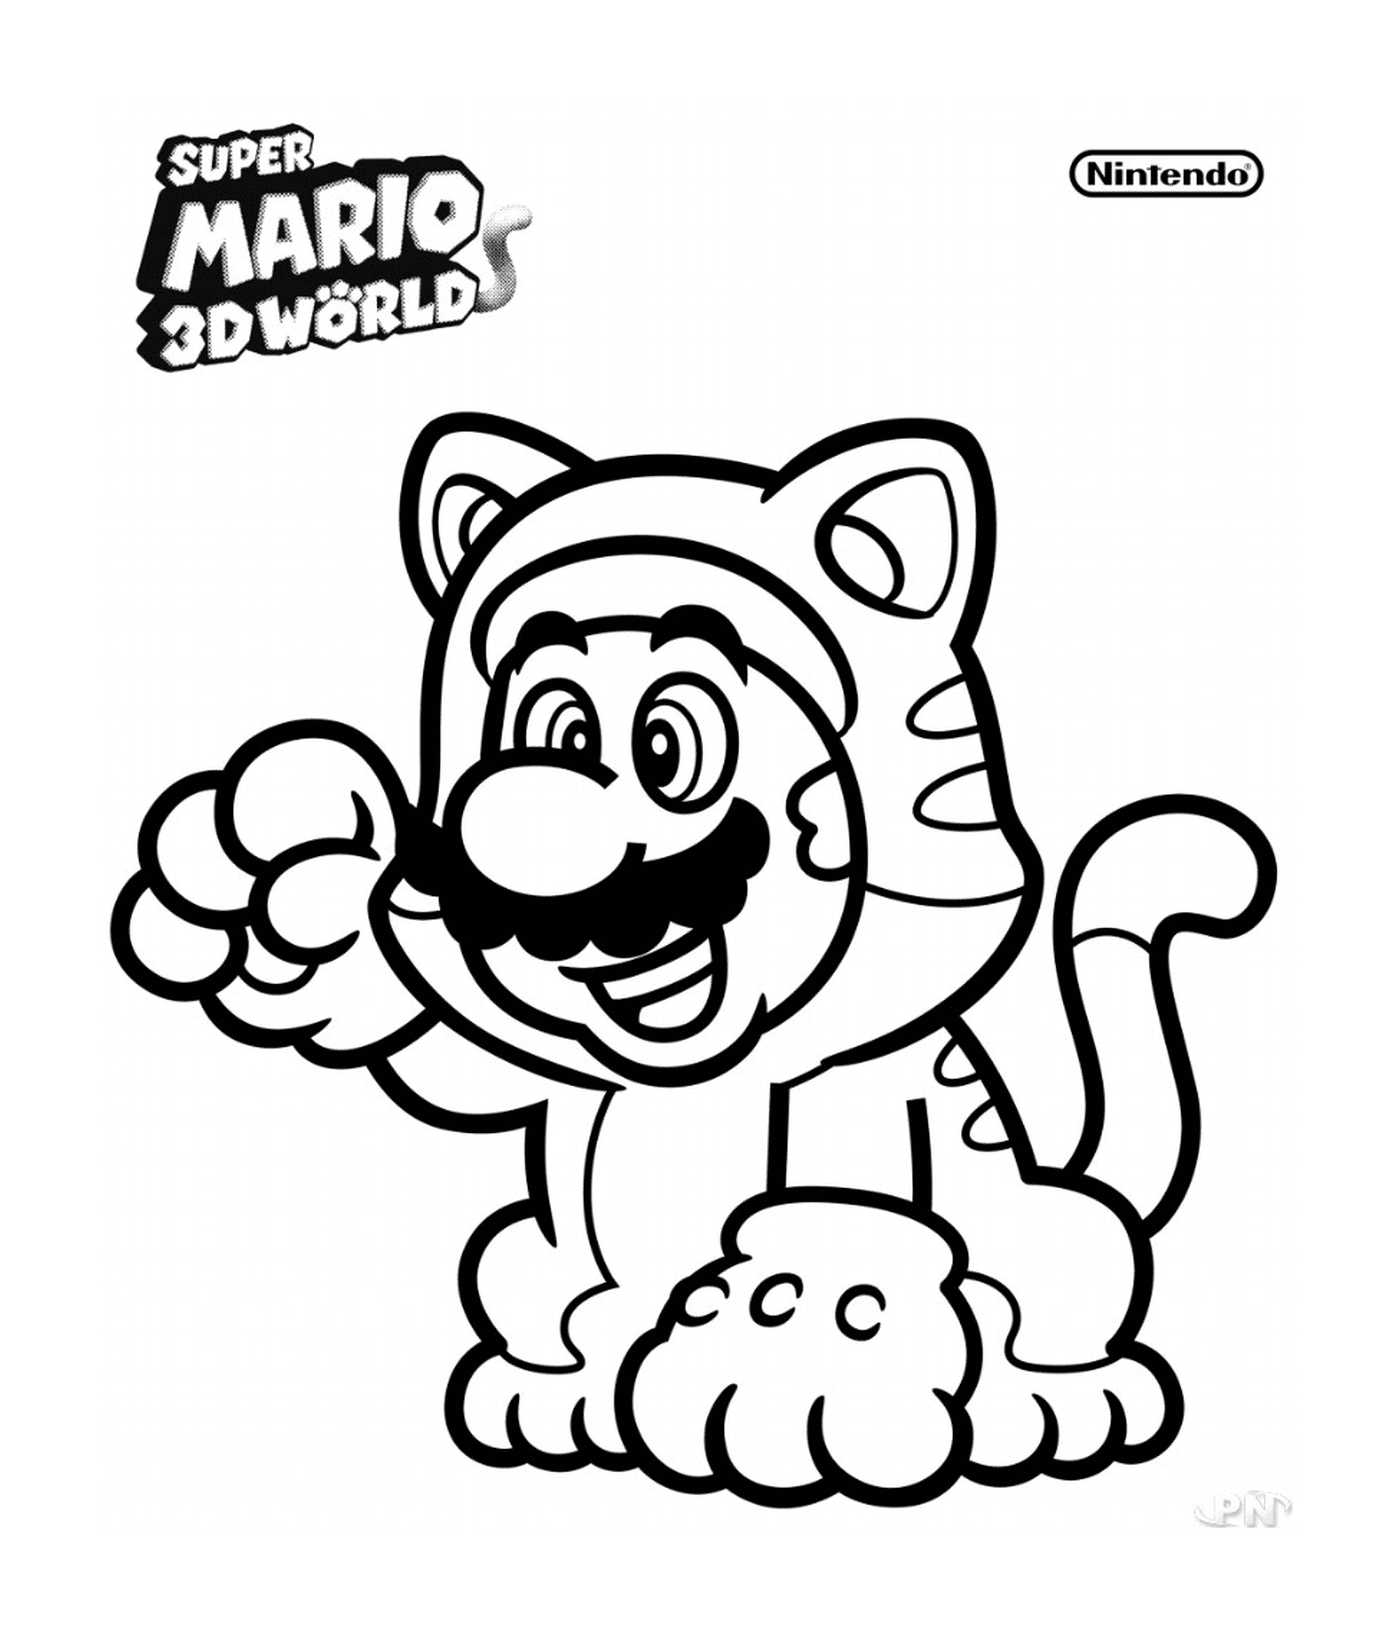  Mario Odyssey, a cat character 